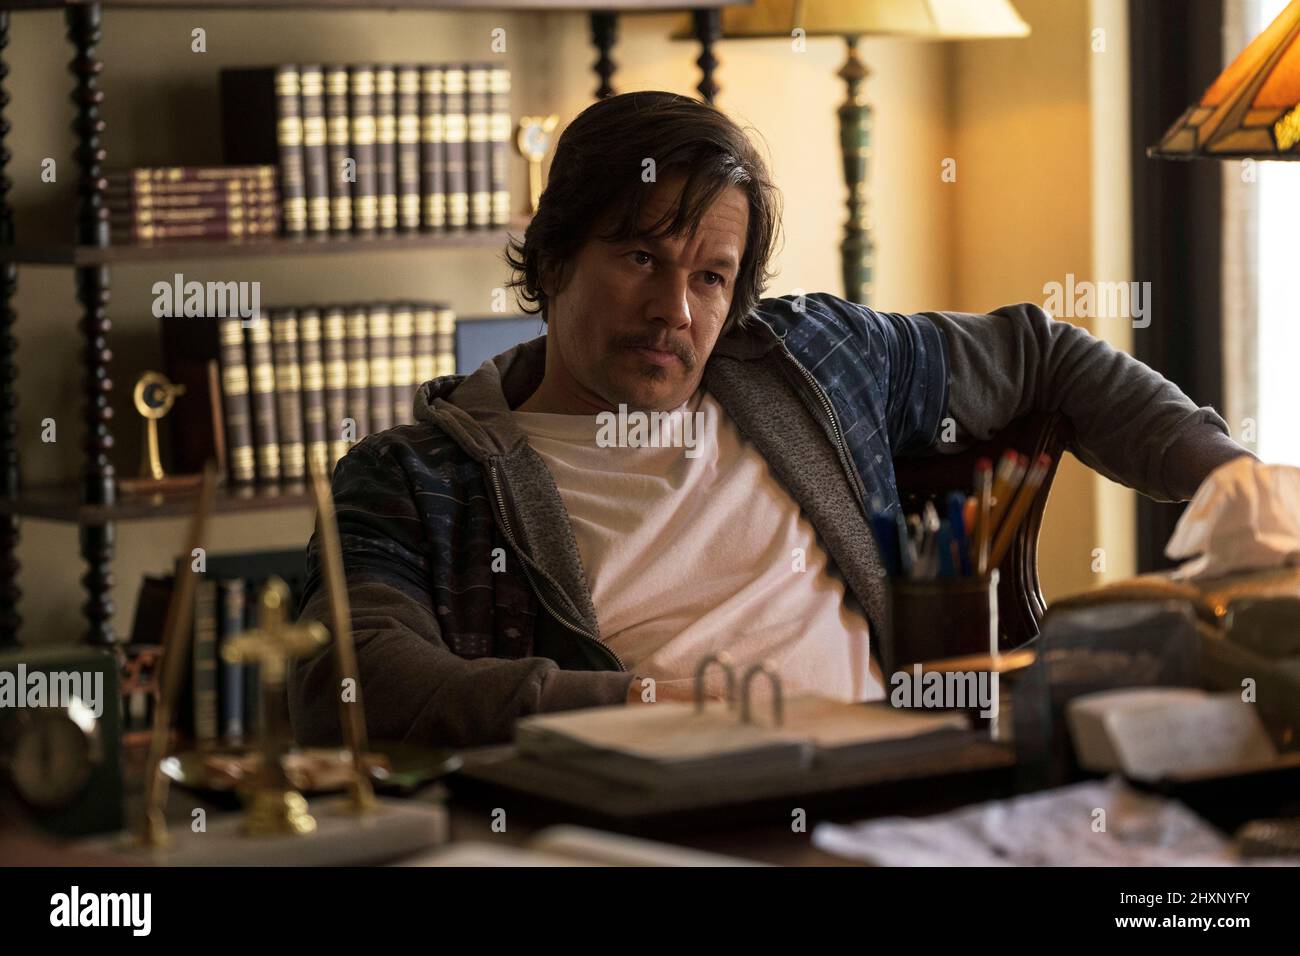 MARK WAHLBERG in FATHER STU (2022), directed by ROSALIND ROSS. Credit: Palm Drive Productions / Album Stock Photo